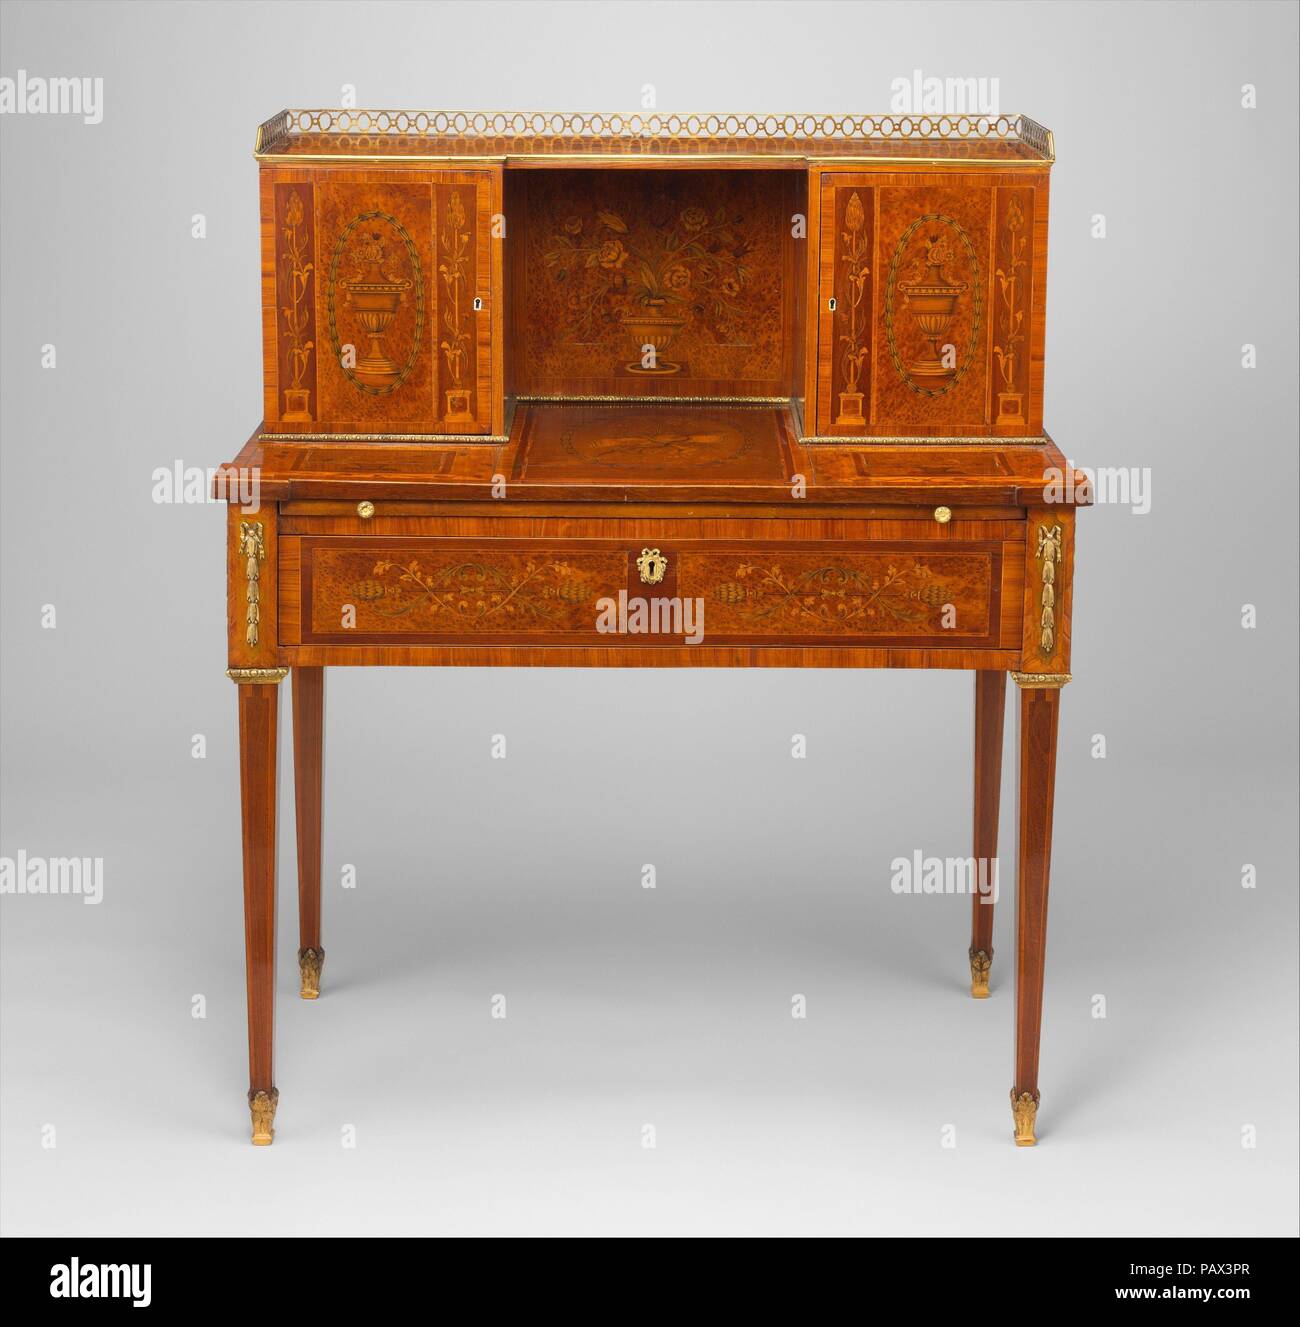 Desk (bonheur du jour). Culture: British. Dimensions: 41 5/16 × 34 7/8 × 18 5/8 in. (104.9 × 88.6 × 47.3 cm). Date: ca. 1780-90.  The idea for this type, with a raised partition in the back, was conceived in Franec about 1750. Extensively used by lady letterwriters, it received the coquettish name bonheur-du-jour. The plain, elegant lines of this example are set off by exceptionally fine, characteristically English marquetry. Museum: Metropolitan Museum of Art, New York, USA. Stock Photo